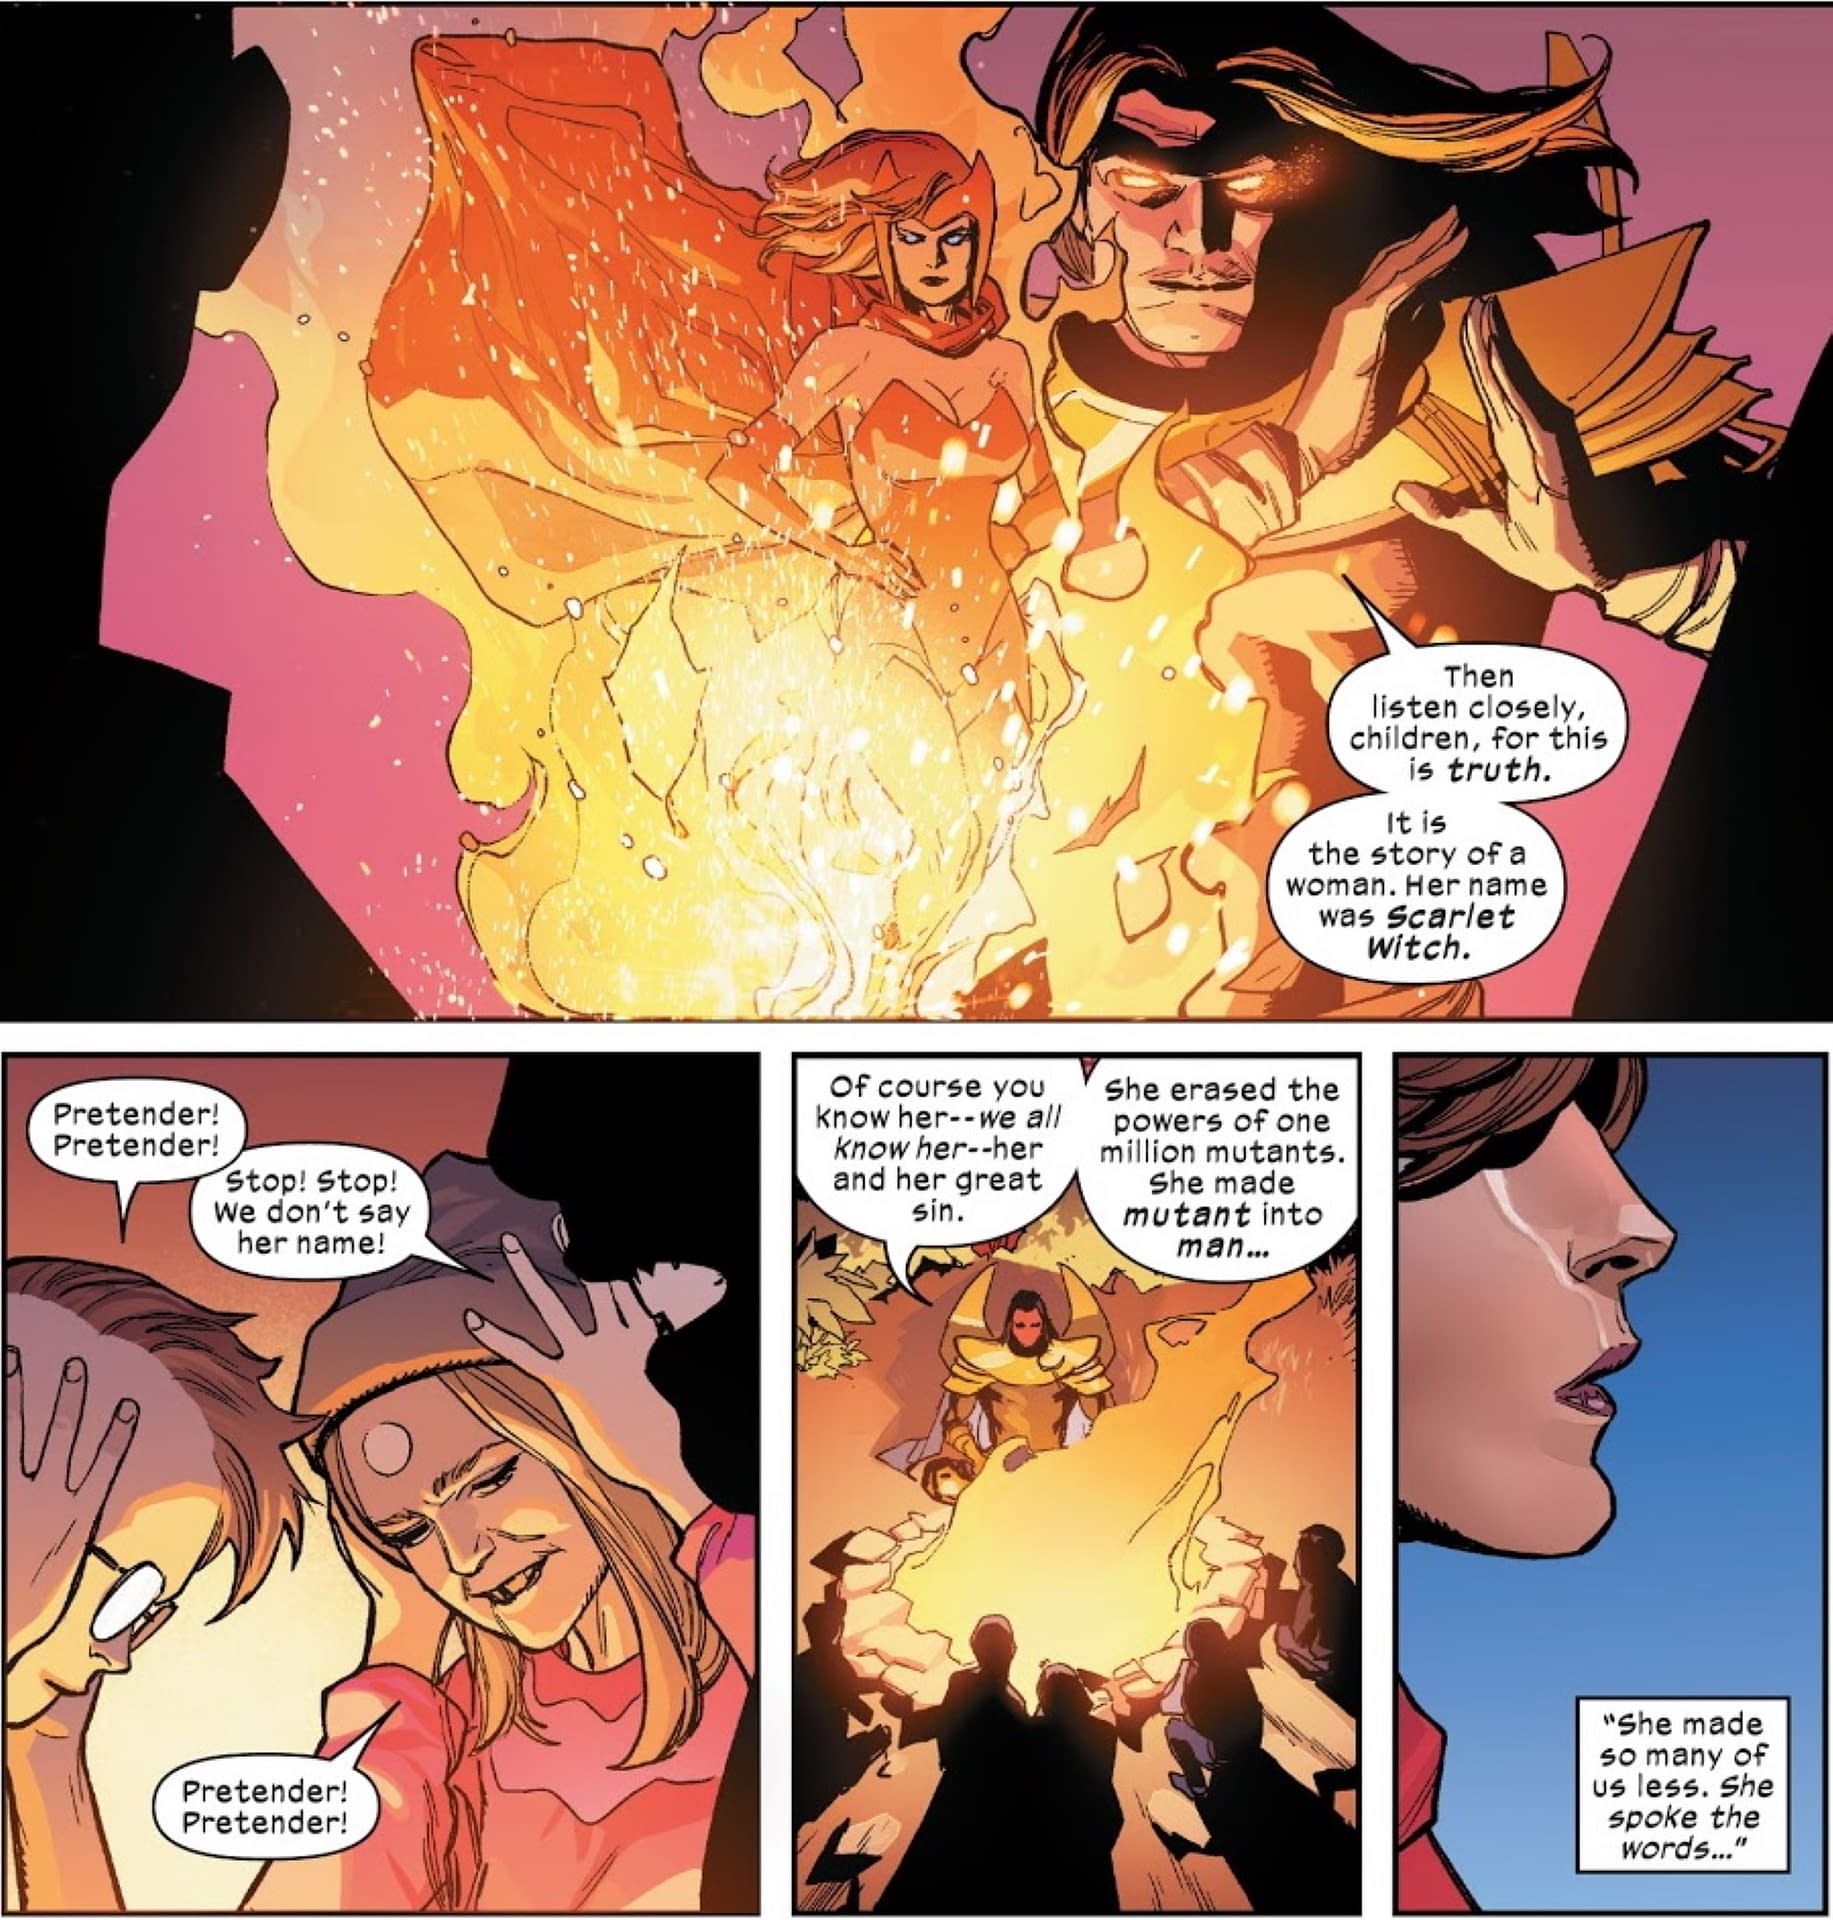 Something is Rotten in the State of Krakoa in New Mutants #1 and X-Force #1  [Spoilers]